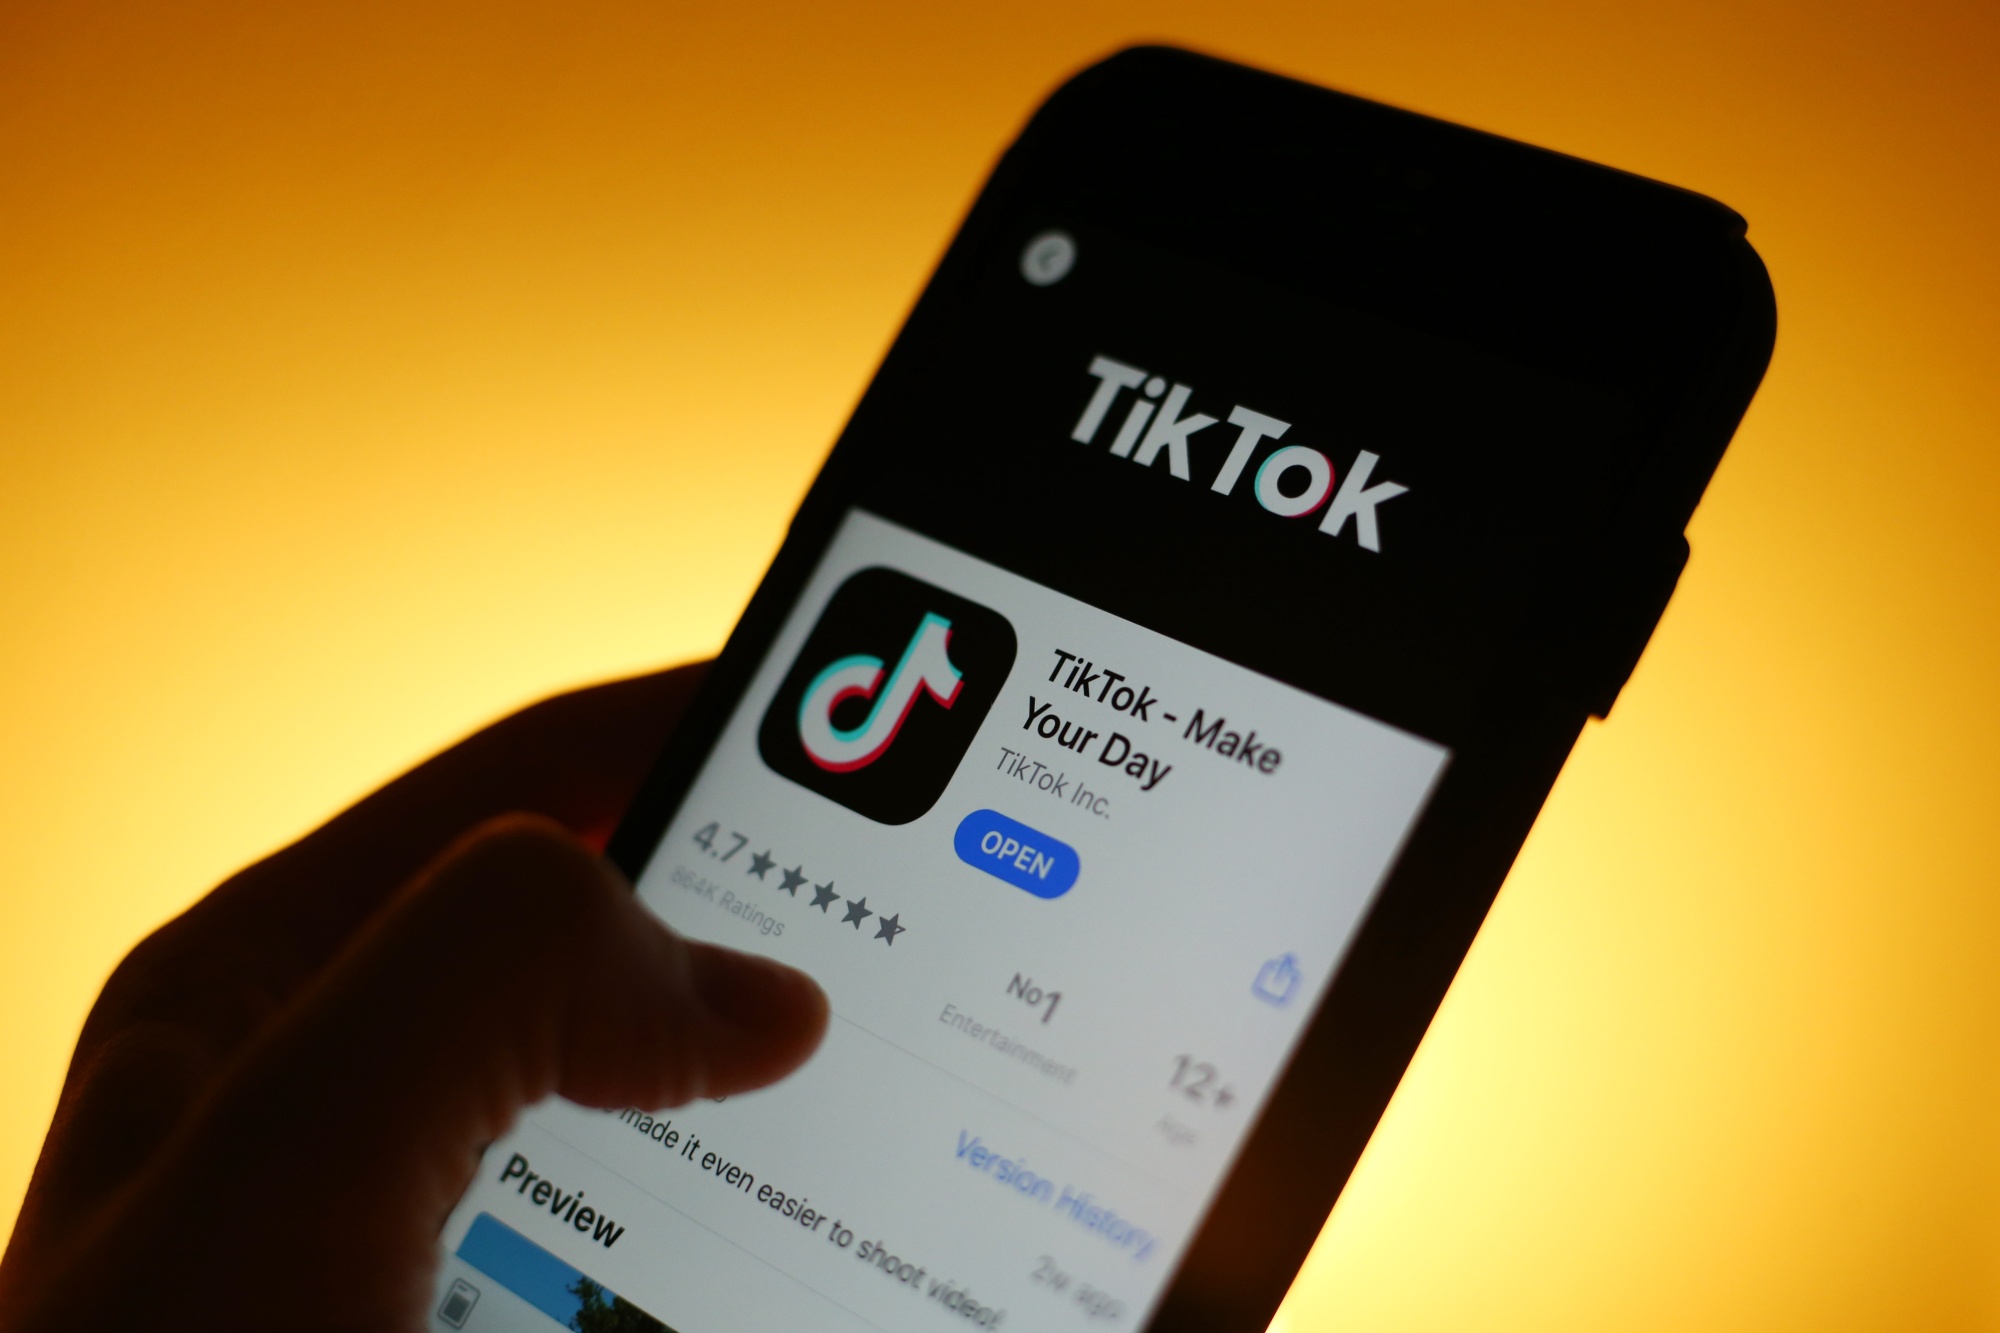 The TikTok app is displayed in the app store on a smartphone.